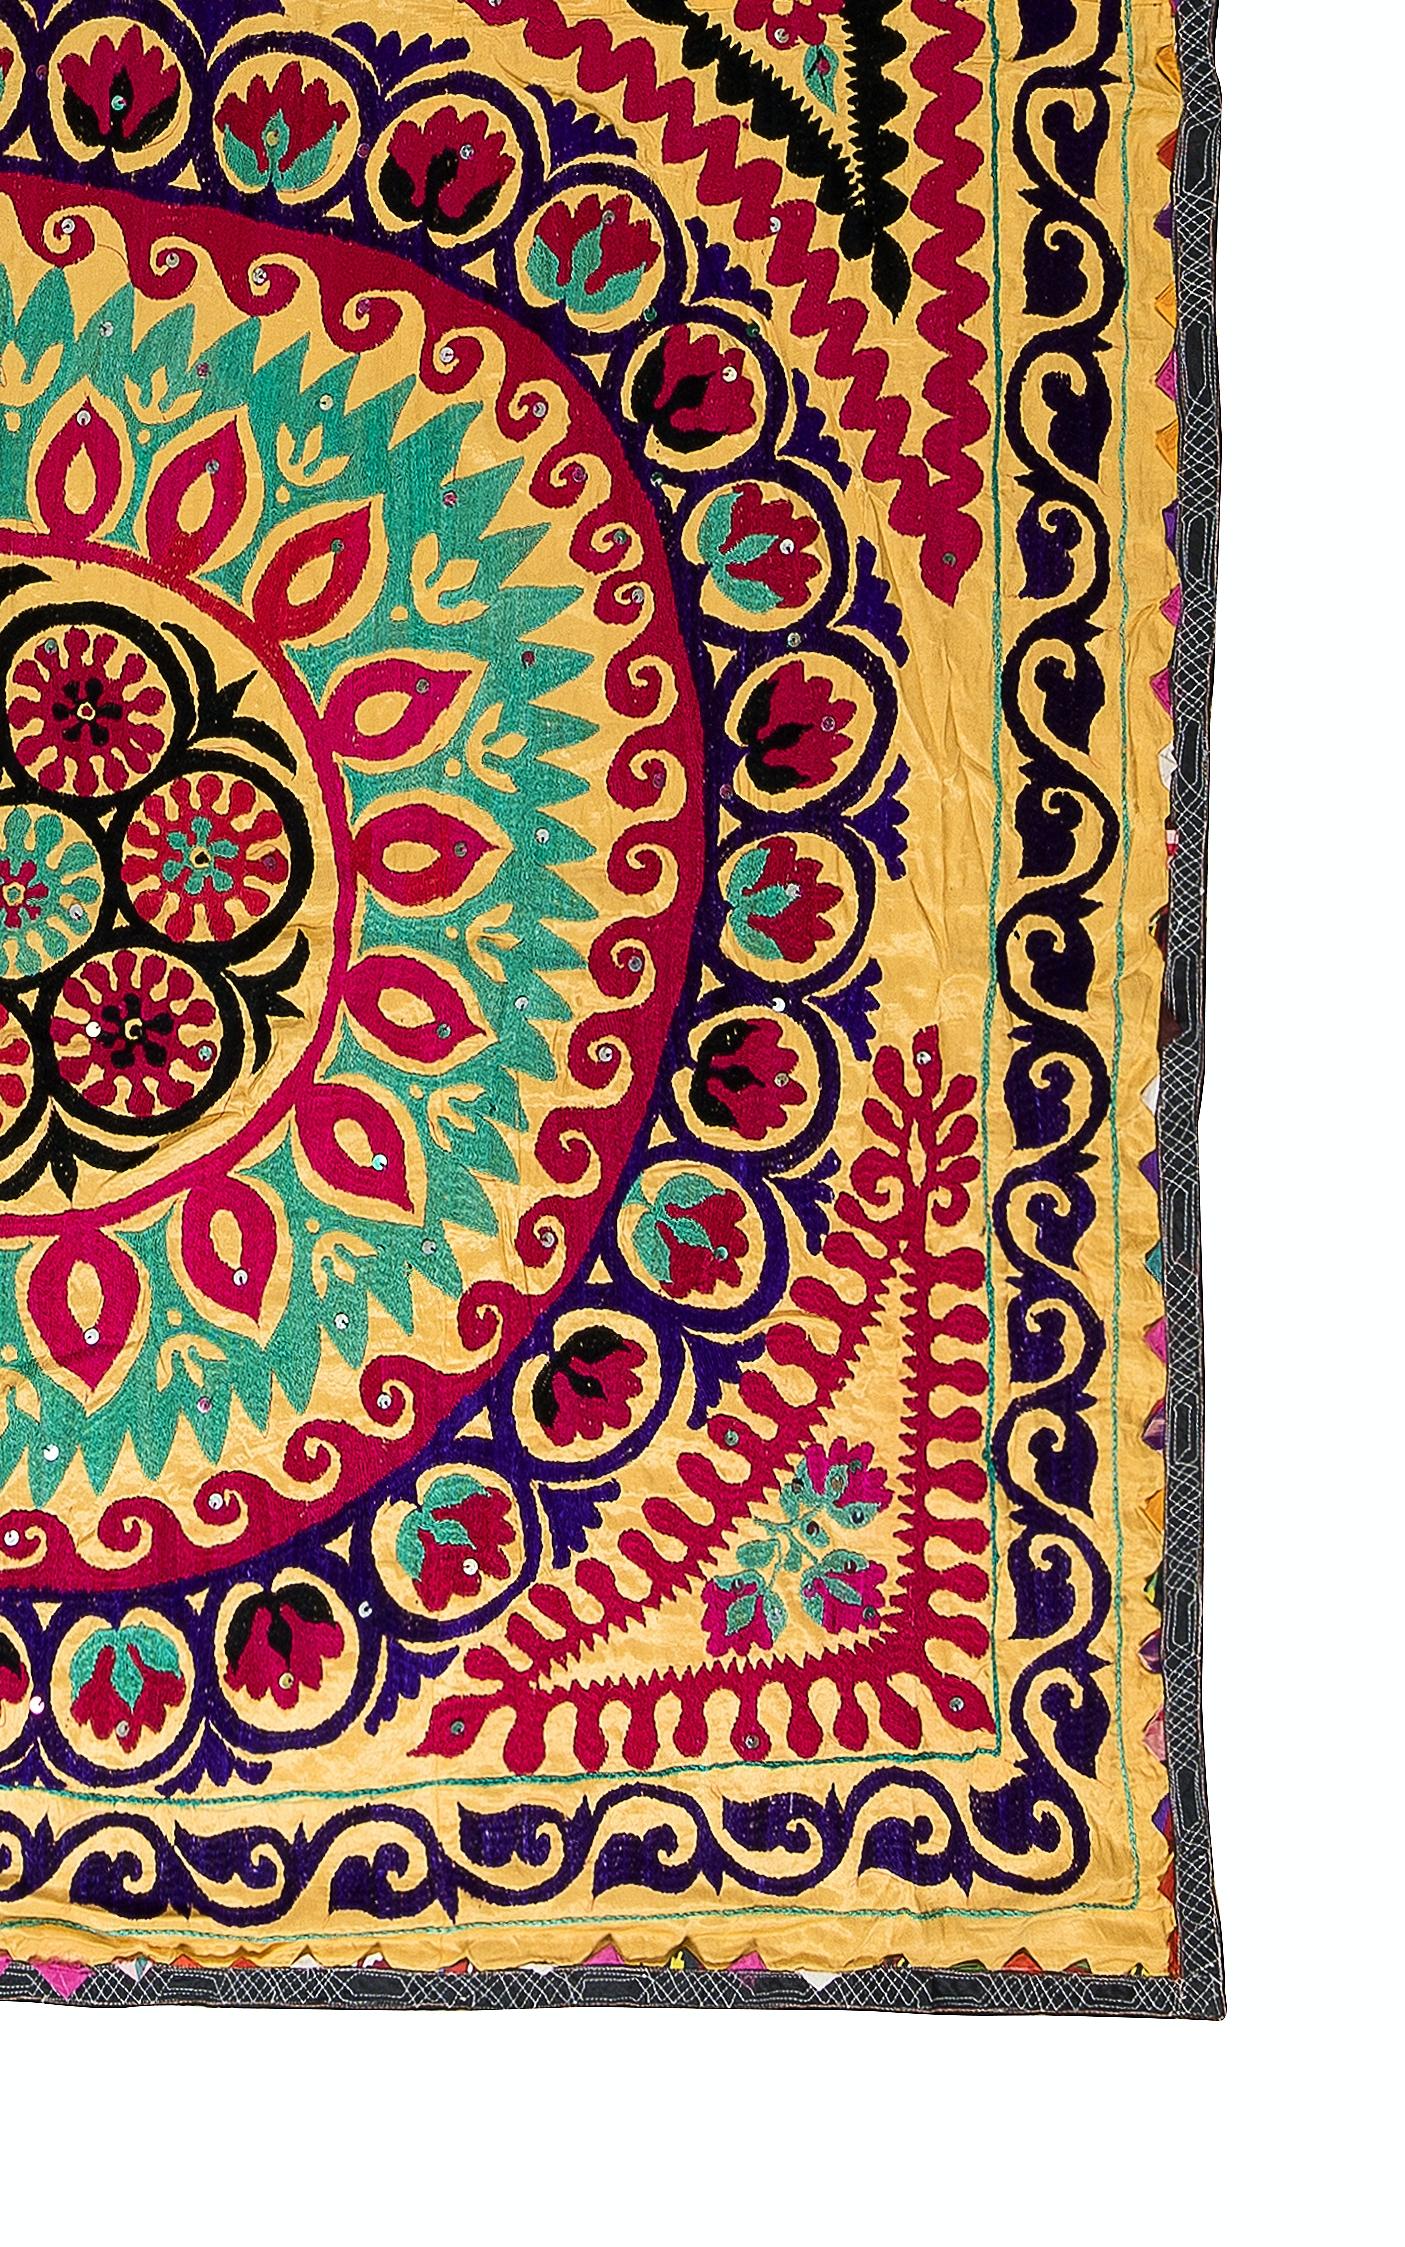 20th Century 5x7.7 Ft Vintage Silk Embroidery Bed Cover, Uzbek Suzani Fabric Wall Hanging For Sale